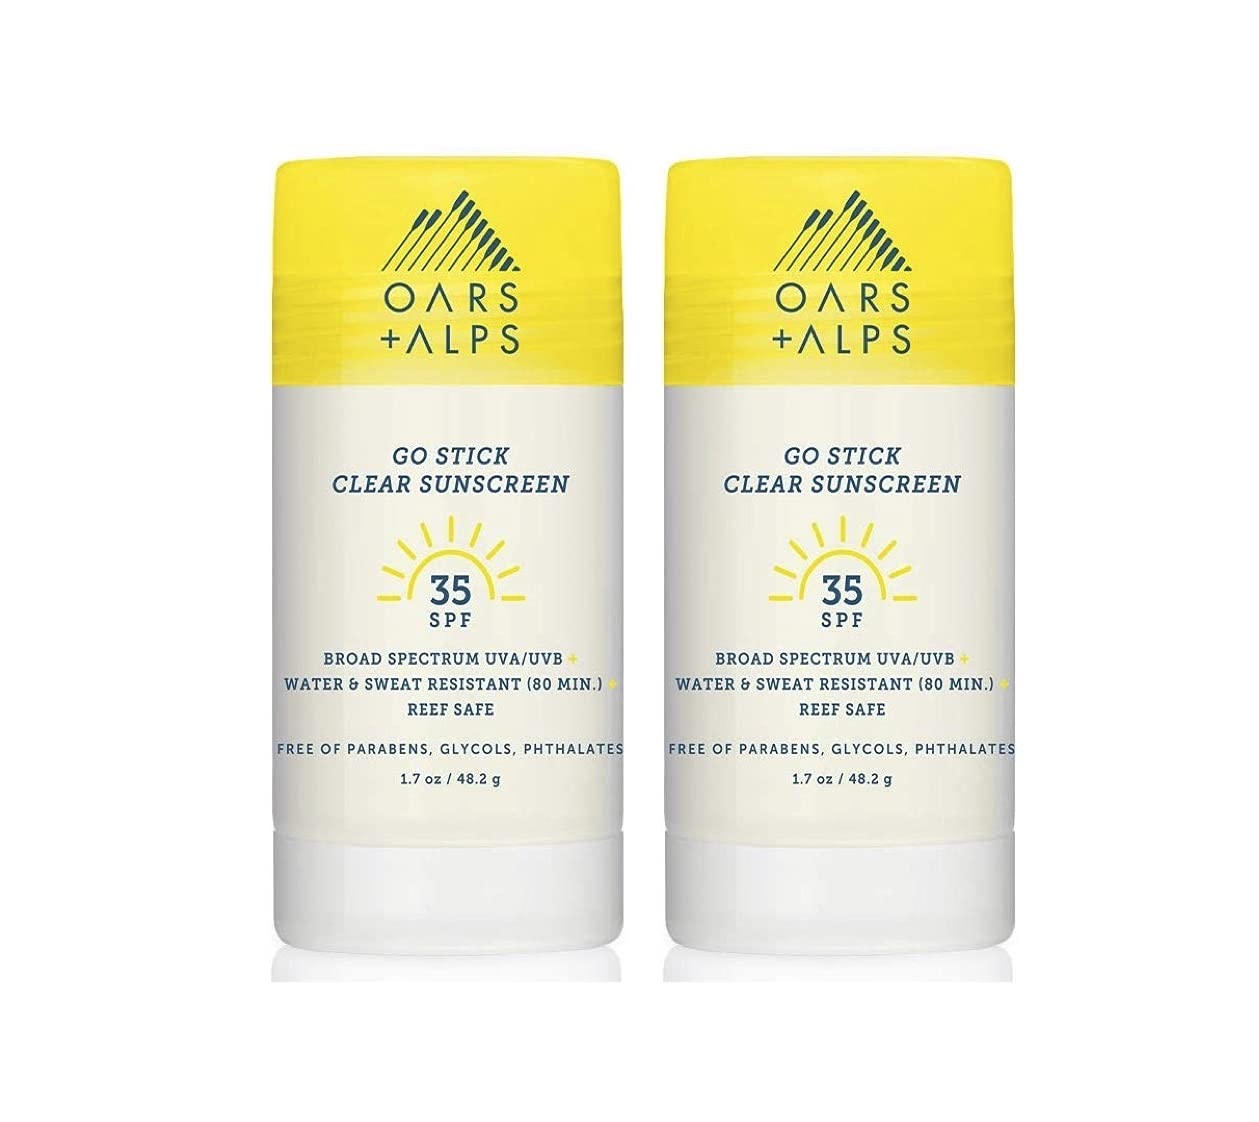 Oars + Alps Go Stick Clear SPF 35 Face Sunscreen, Skin Care Infused with Vitamin E and Antioxidants, Water and Sweat Resistant, TSA Friendly, 1.7 Oz, 2 Pack